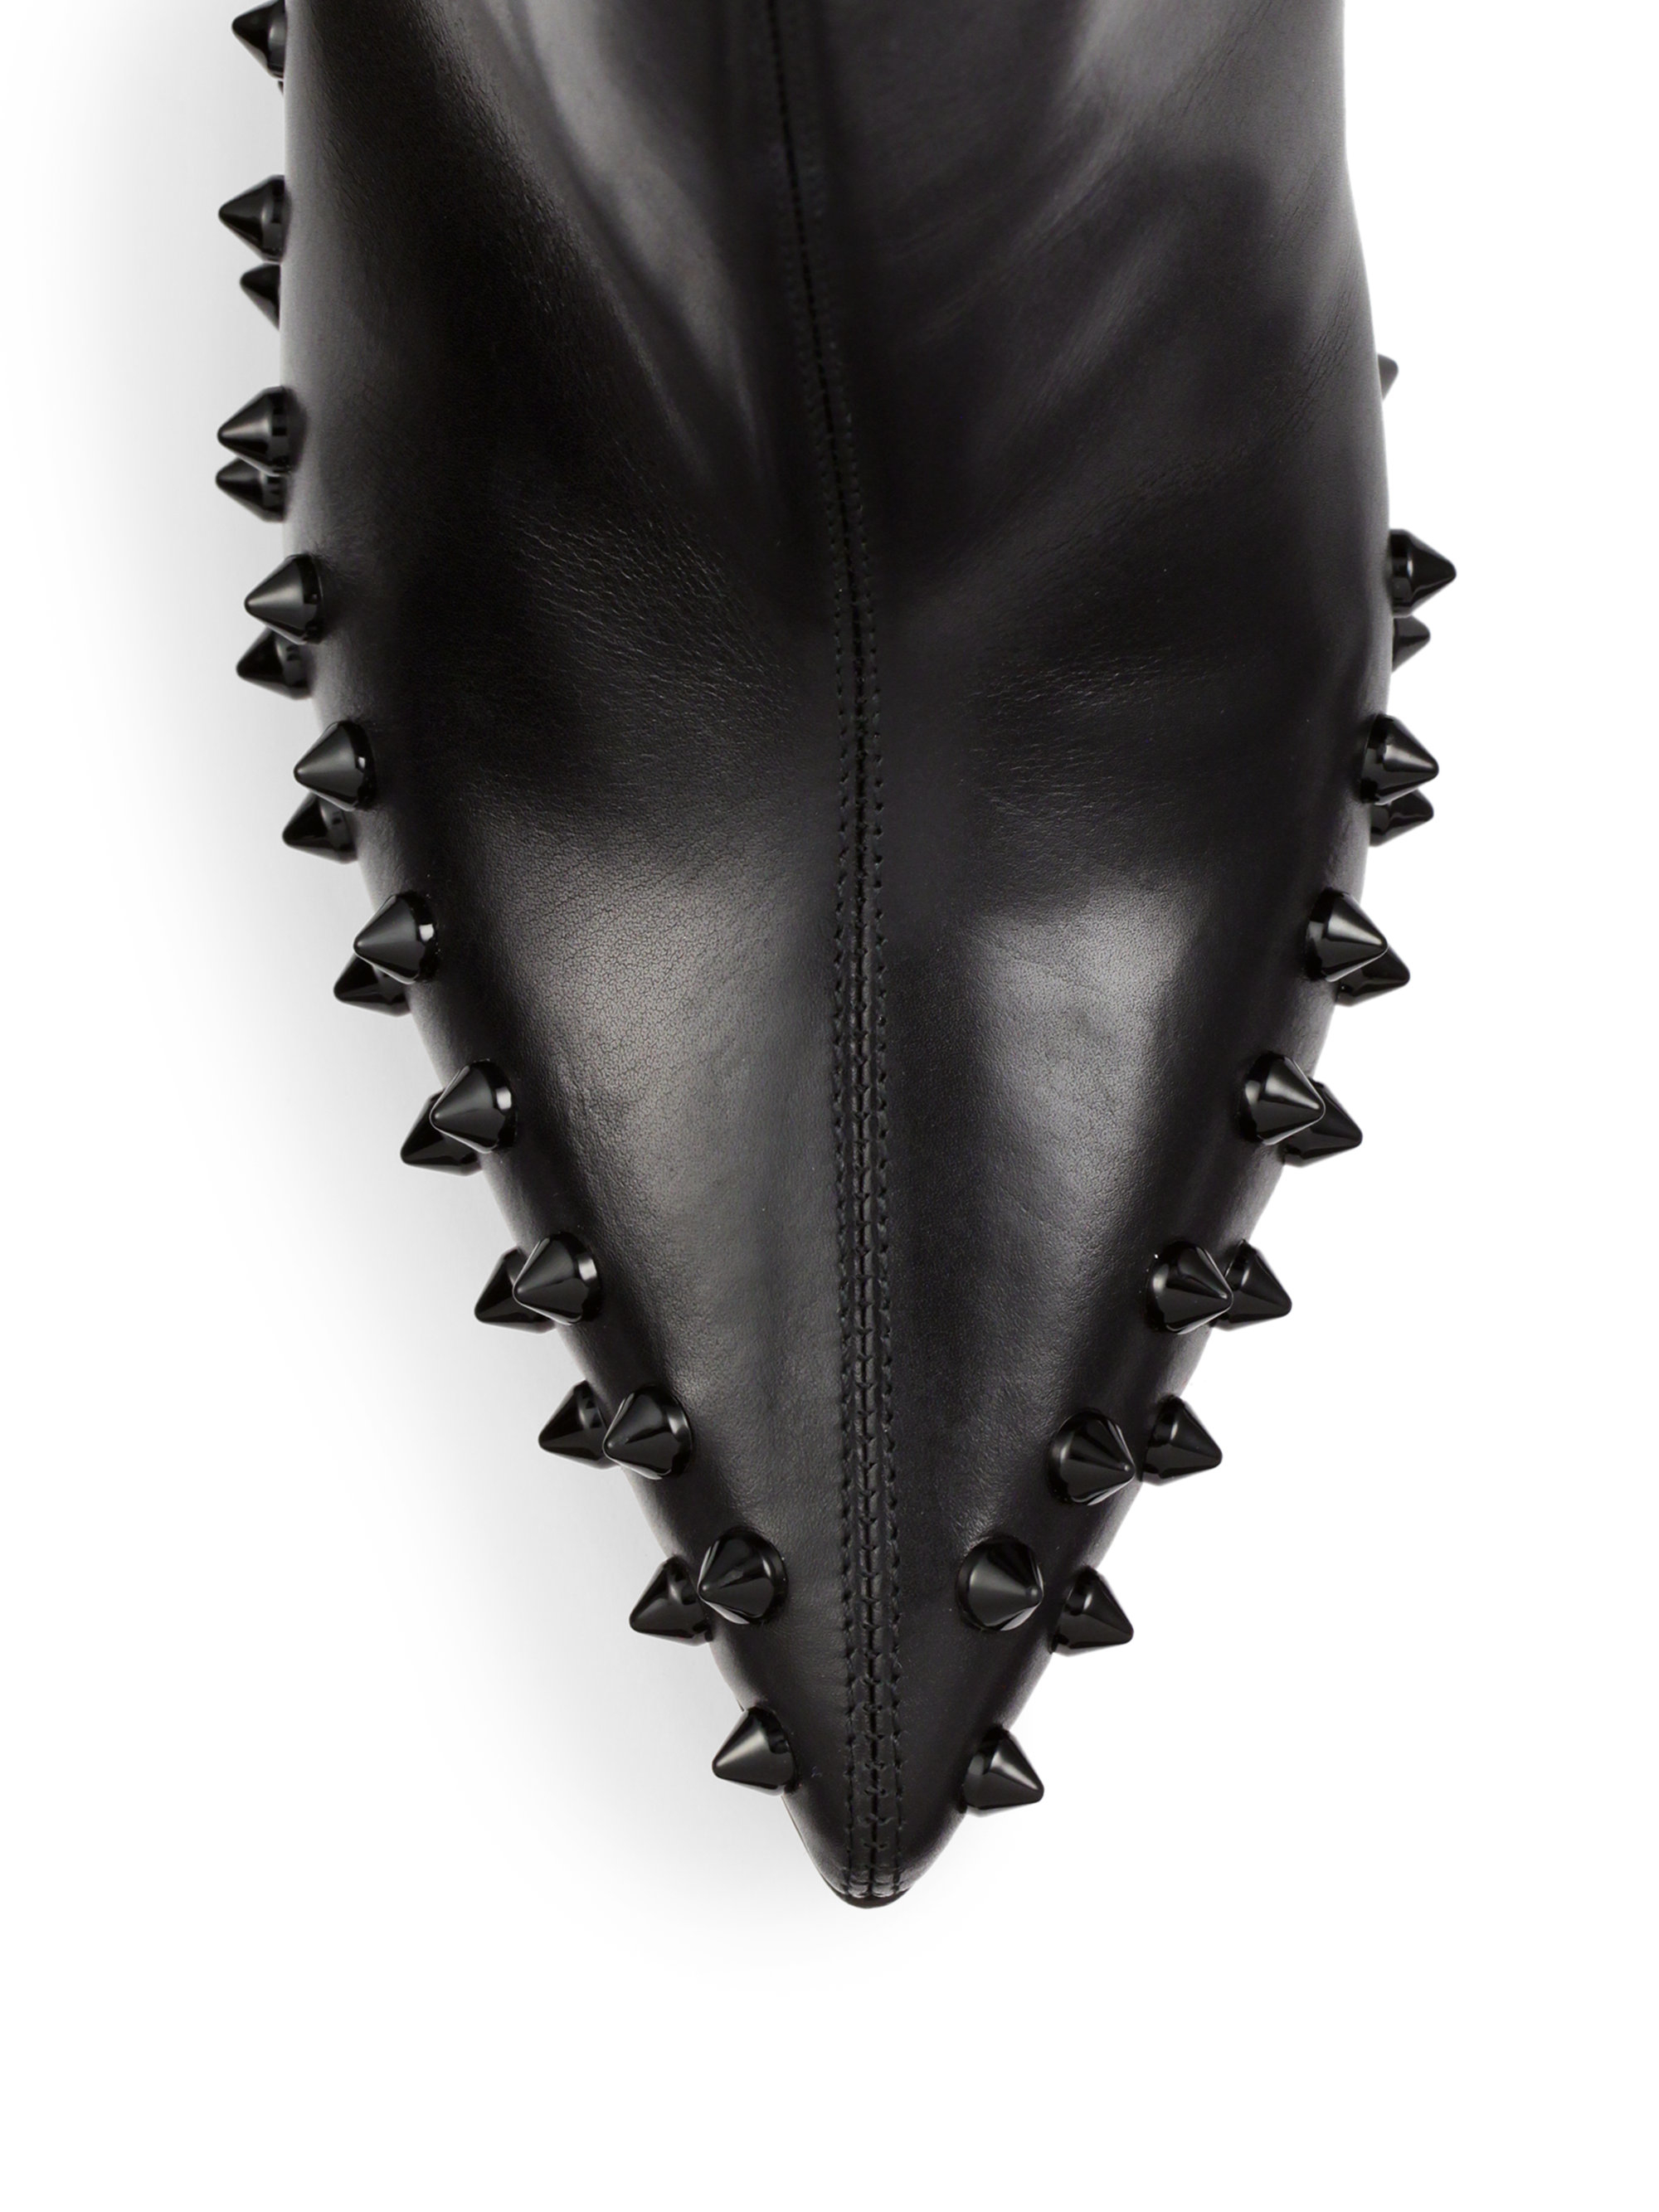 Christian louboutin Willetta Studded Booties in Black | Lyst  